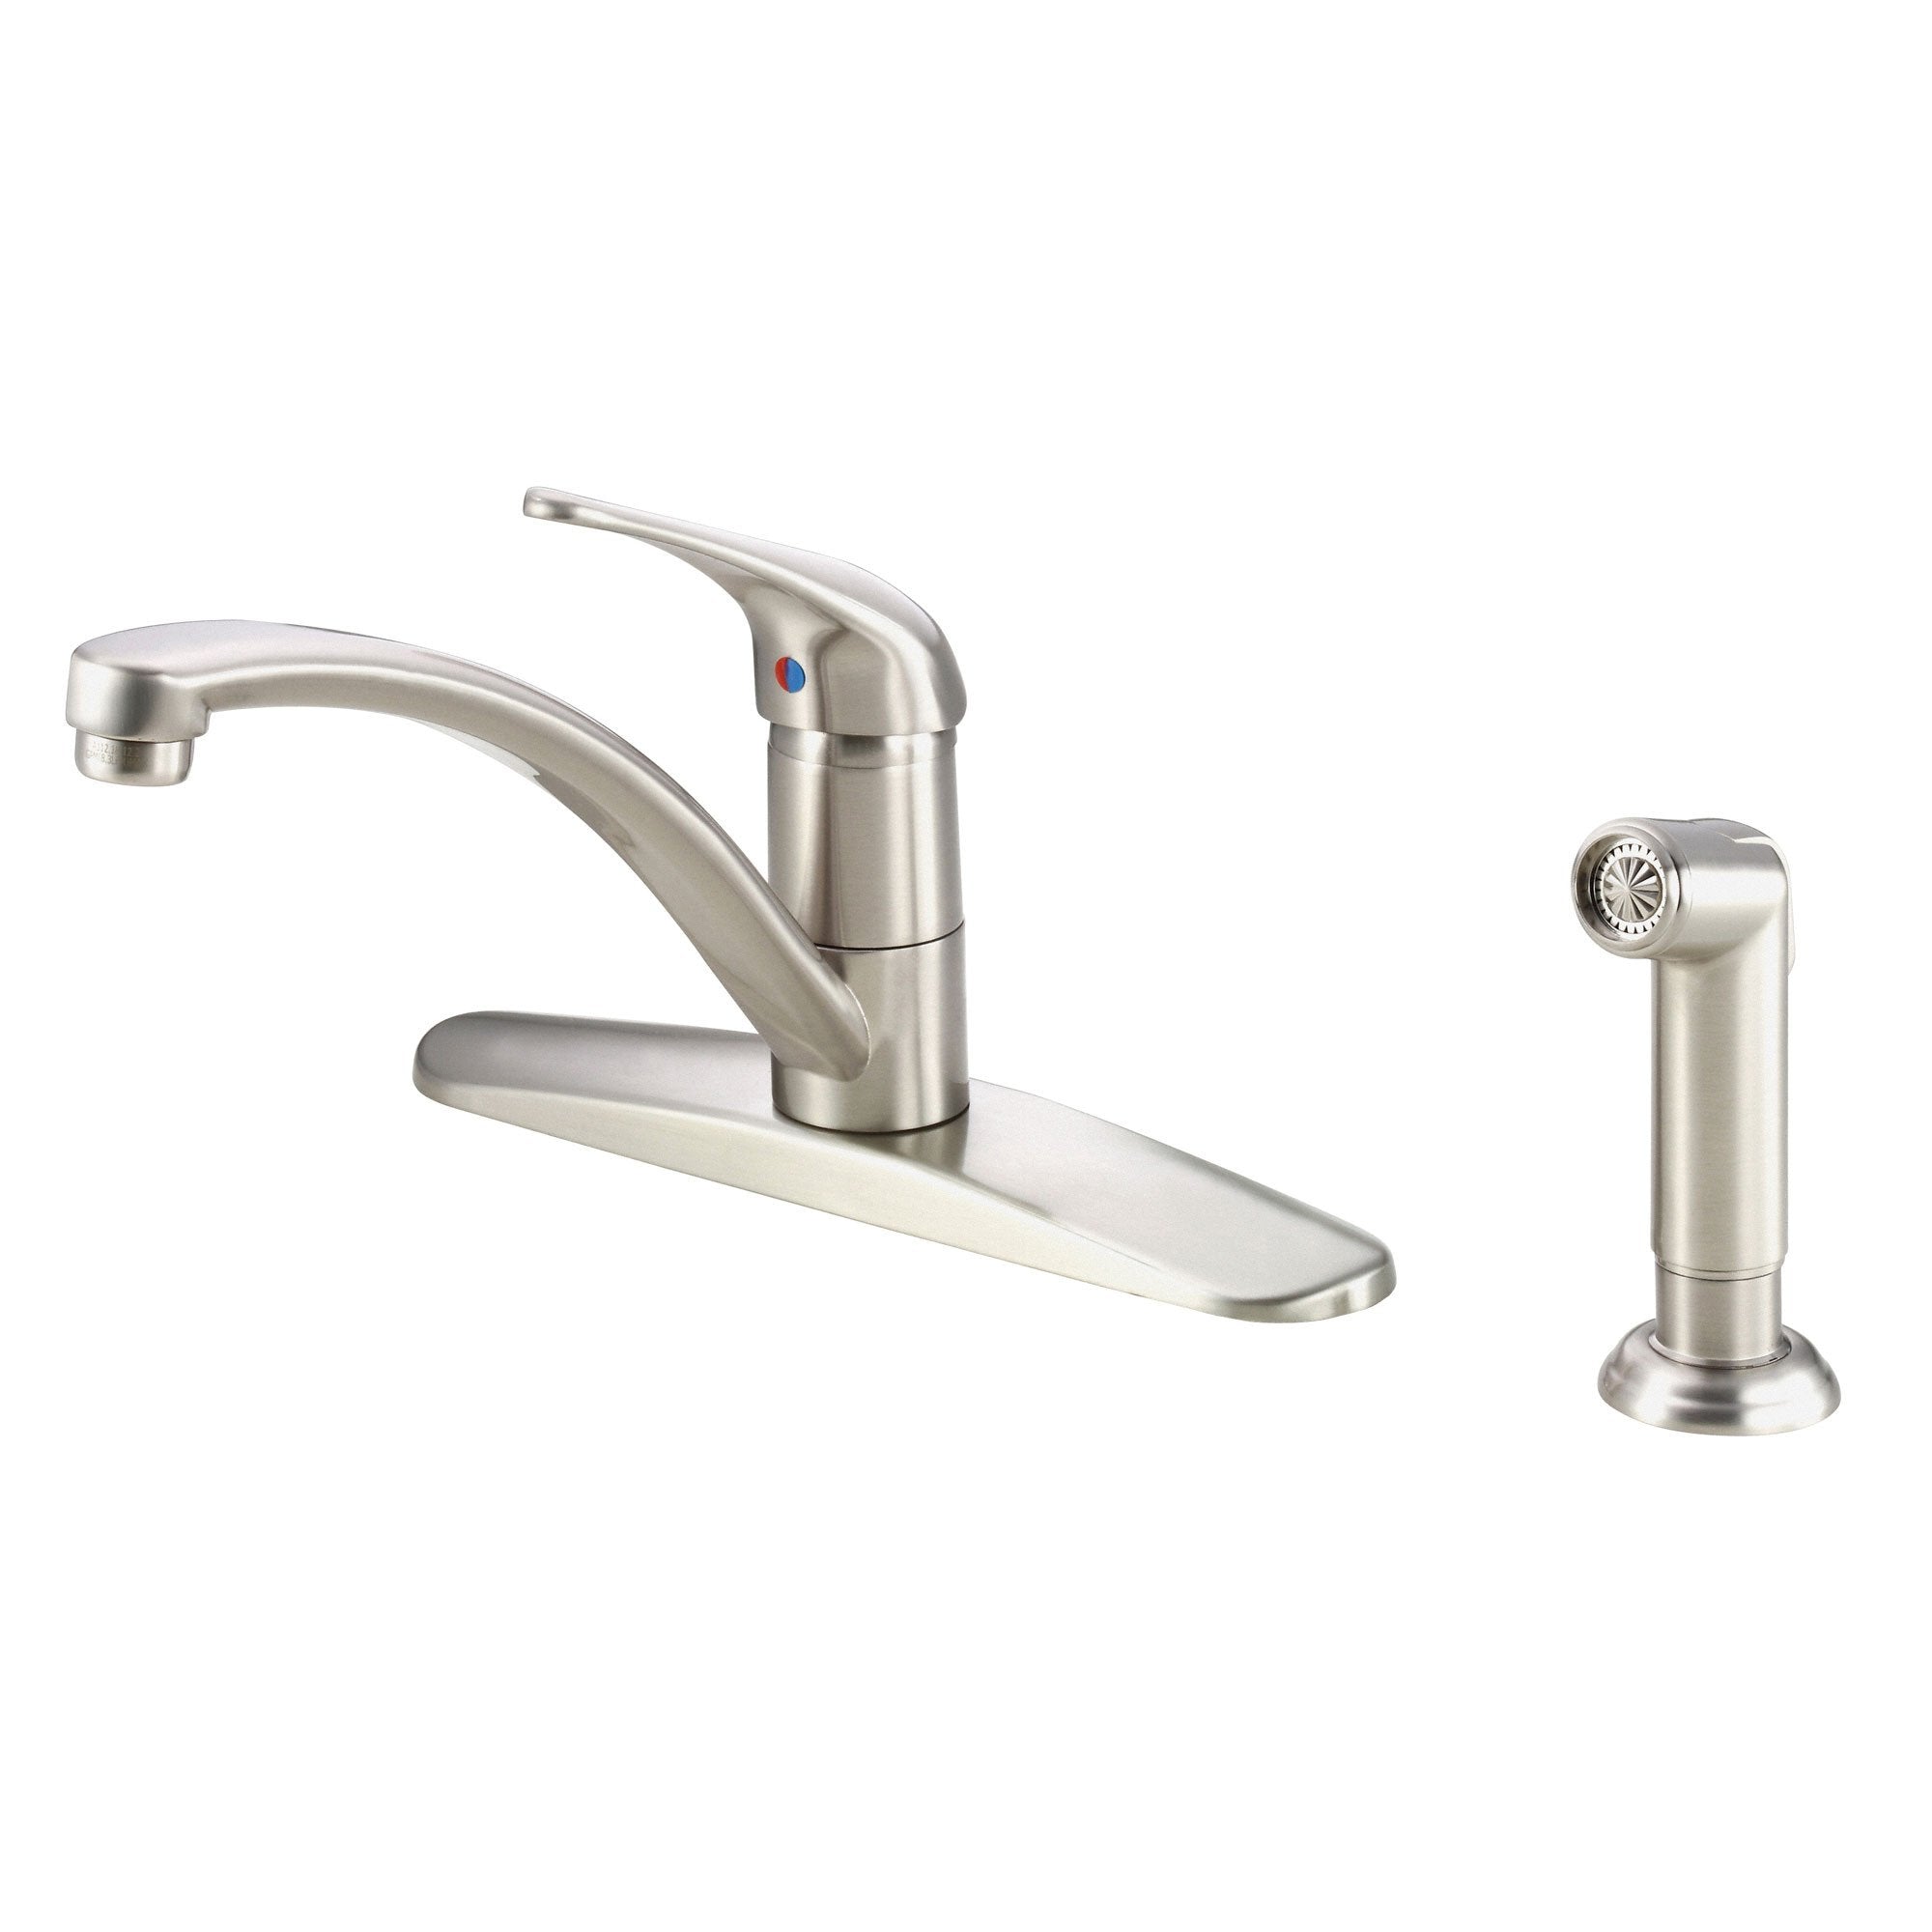 Danze Melrose Stainless Steel Basic Kitchen Faucet with Sprayer